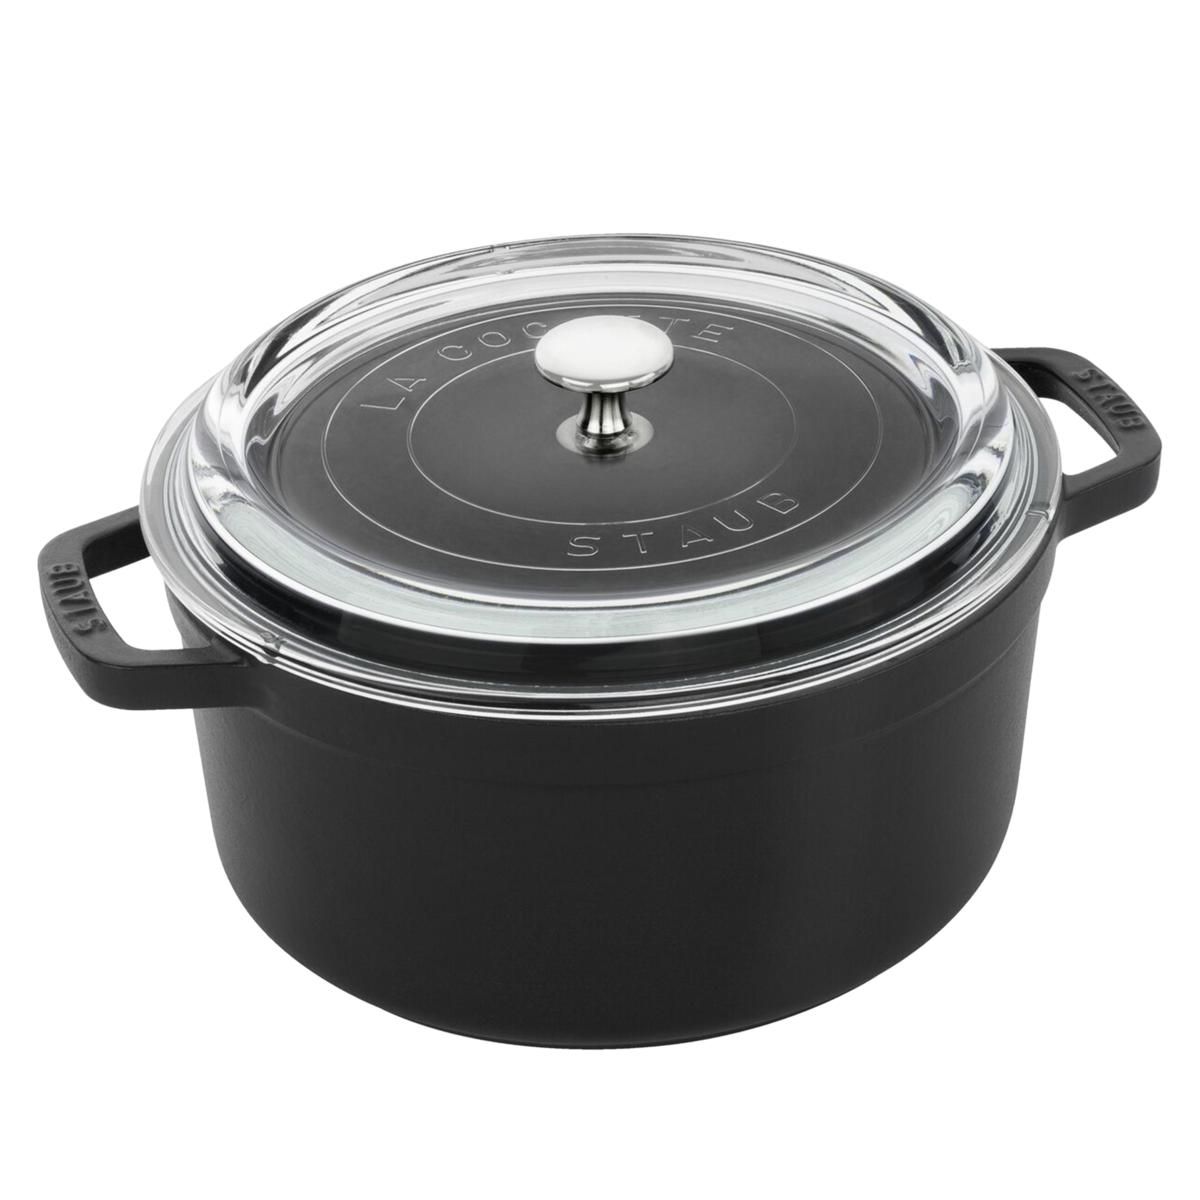 Staub 4-Quart Enameled Cast Iron Cocotte with Glass Lid - 20713647 | HSN | HSN